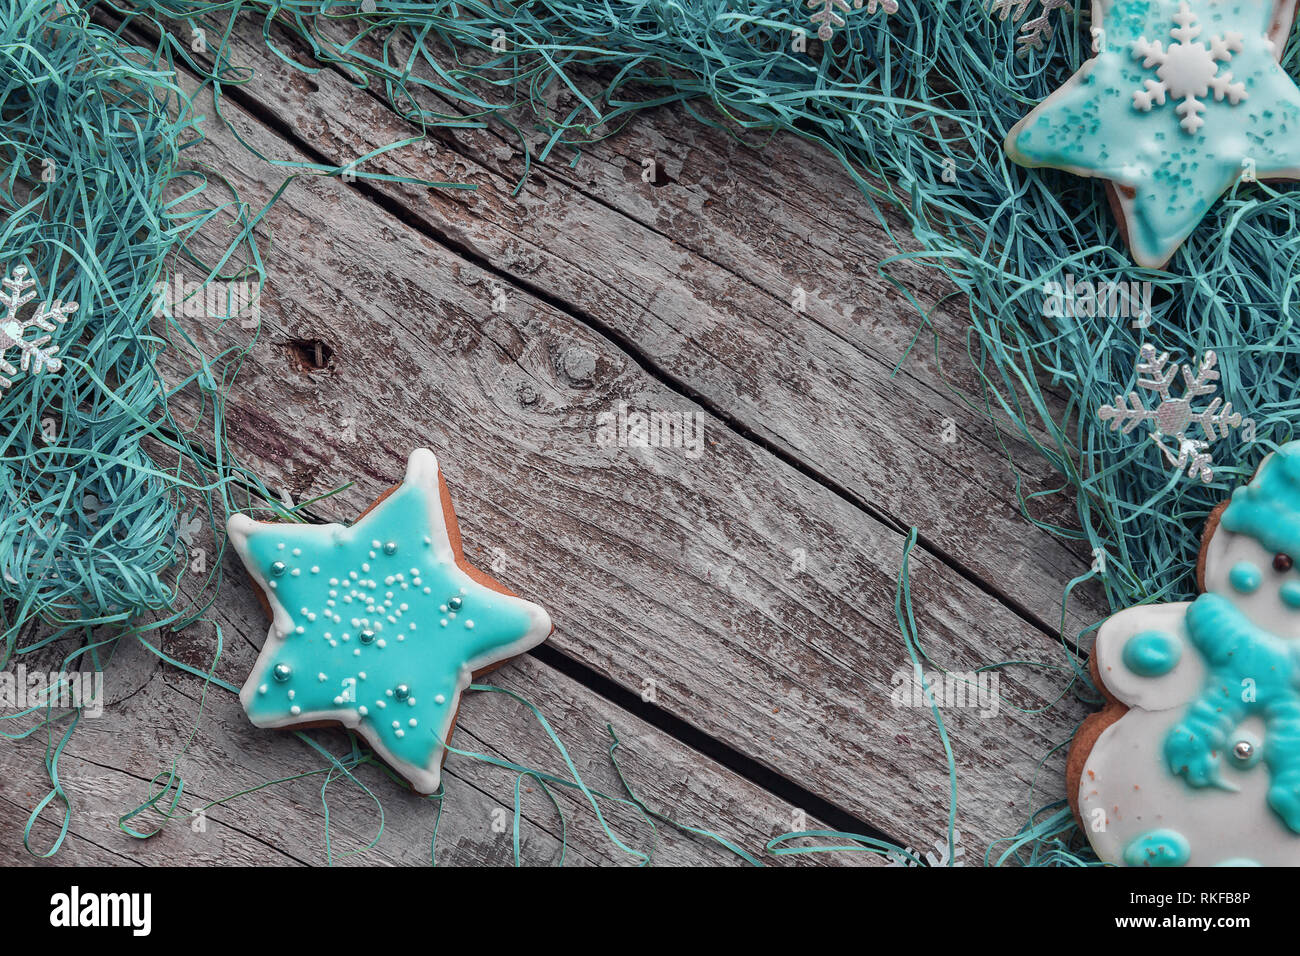 Turquoise star shape with turquoise decorations on gray wood background with copy space. Stock Photo